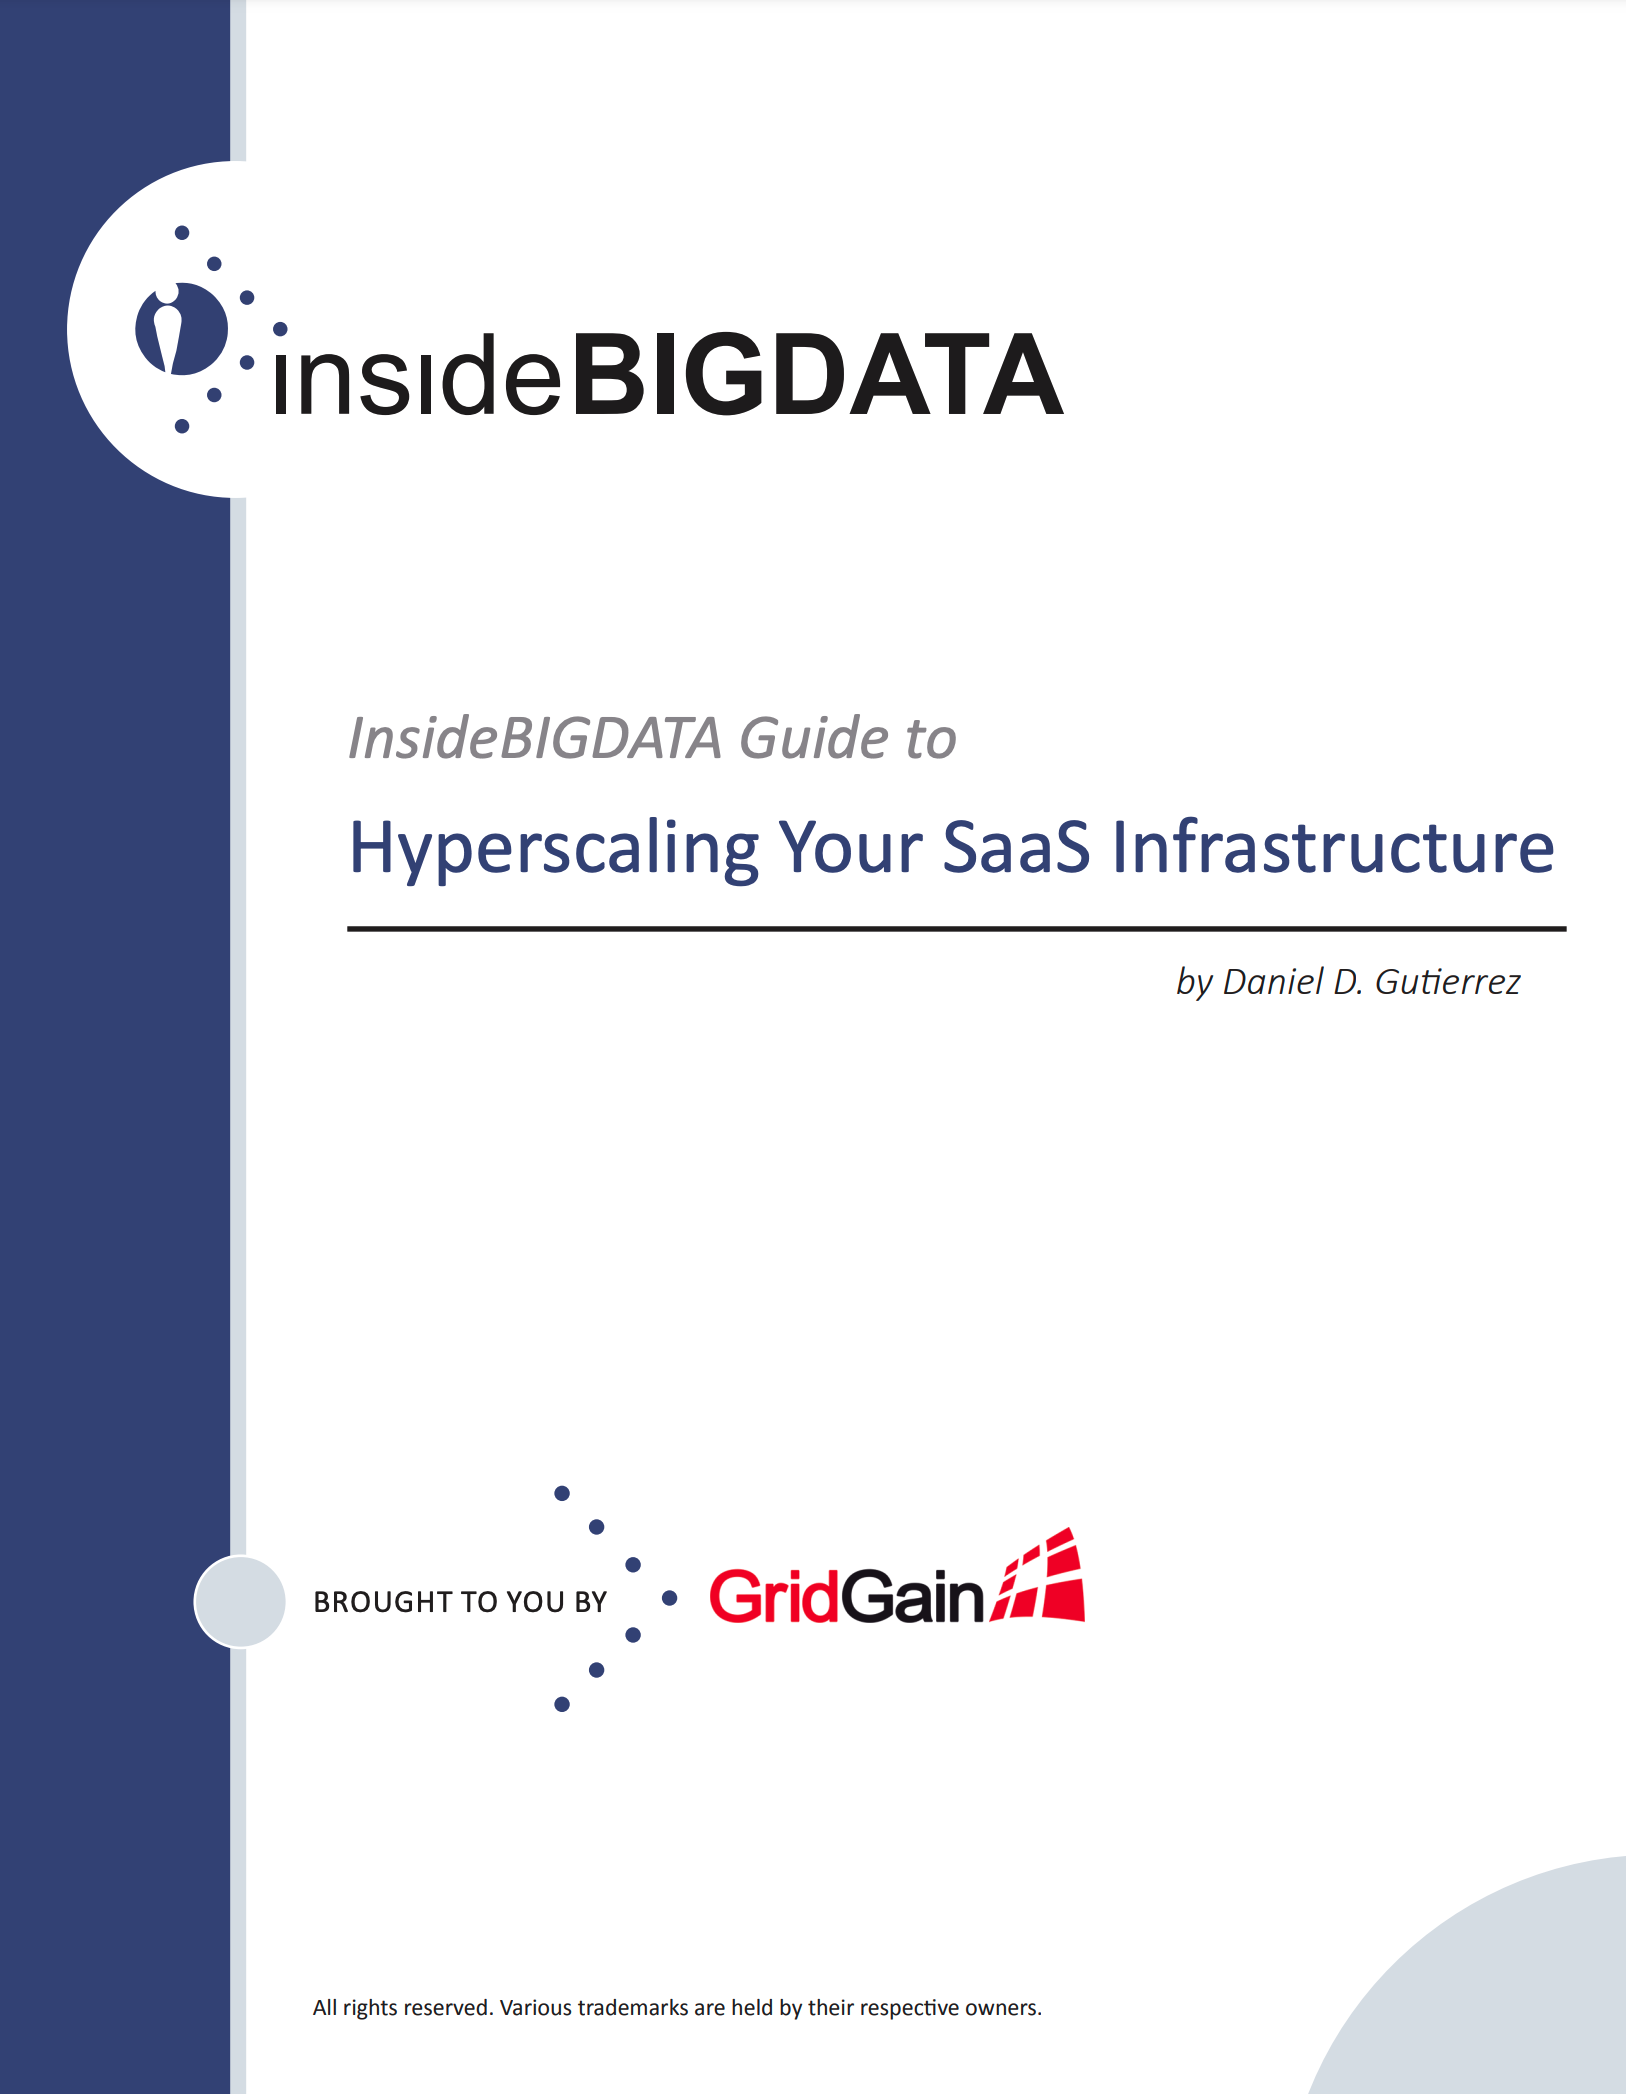 Inside BIGDATA Guide to Hyperscaling Your SaaS Infrastructure